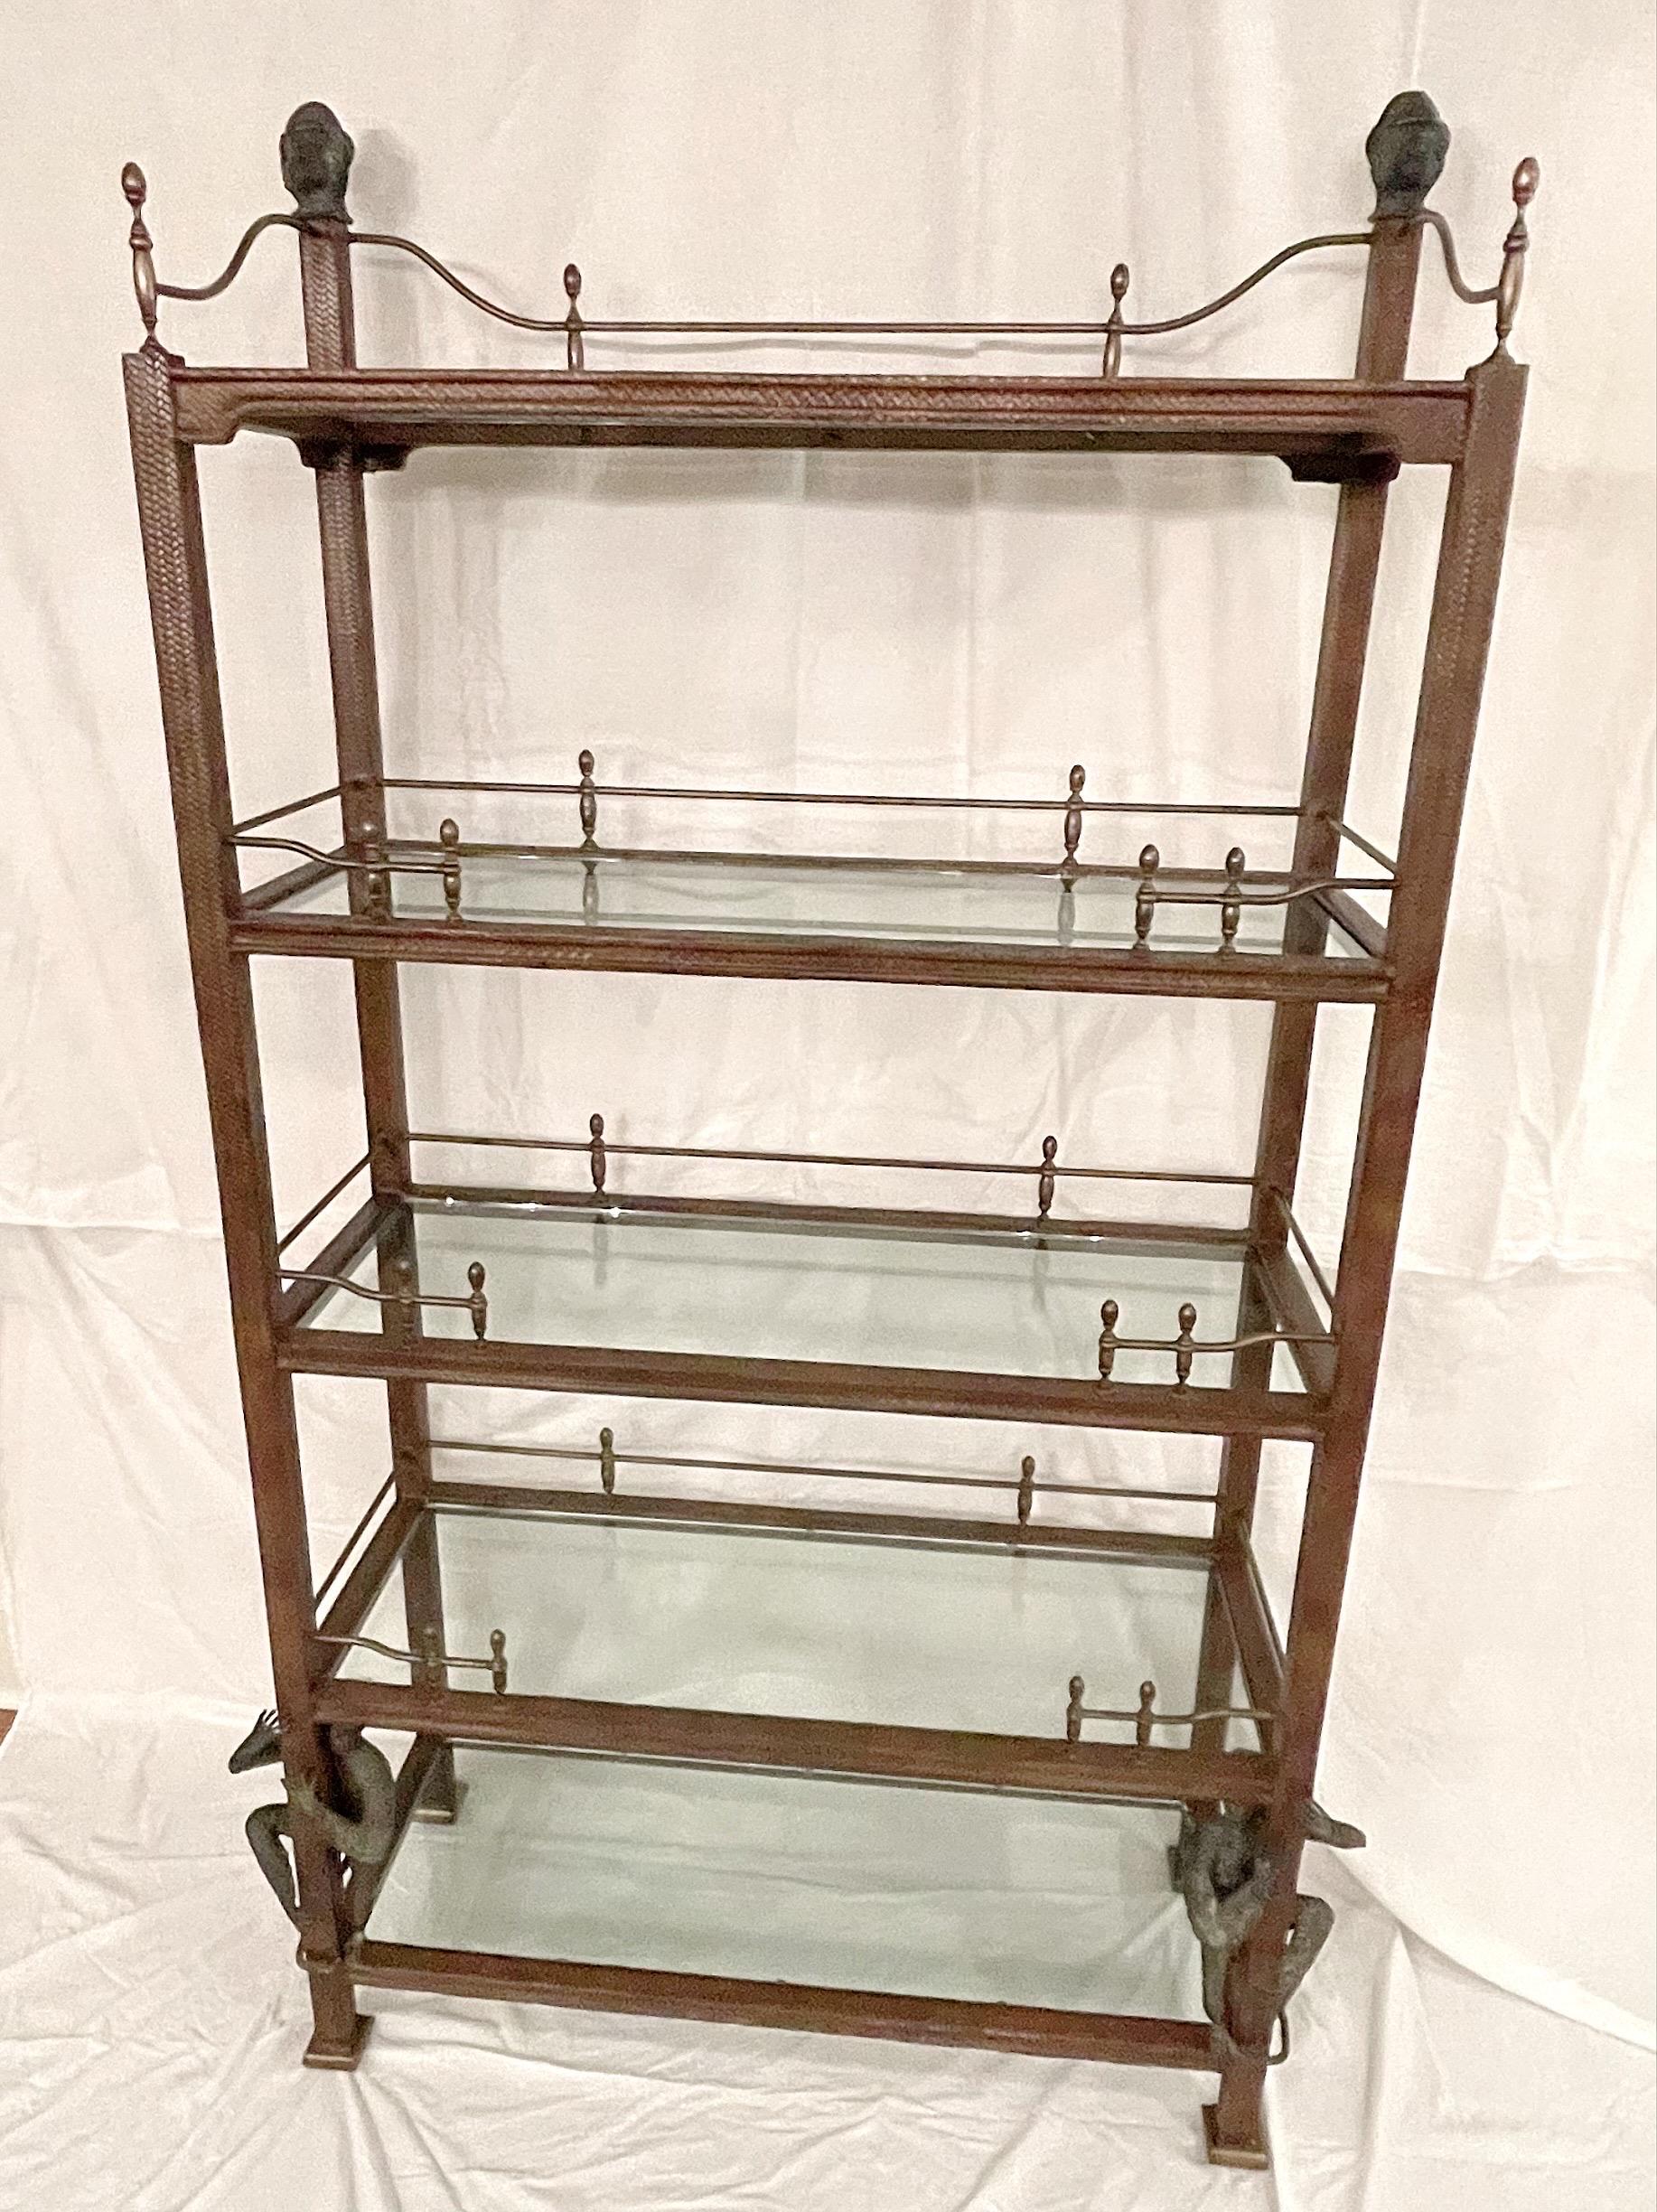 wood shelves with brass rails